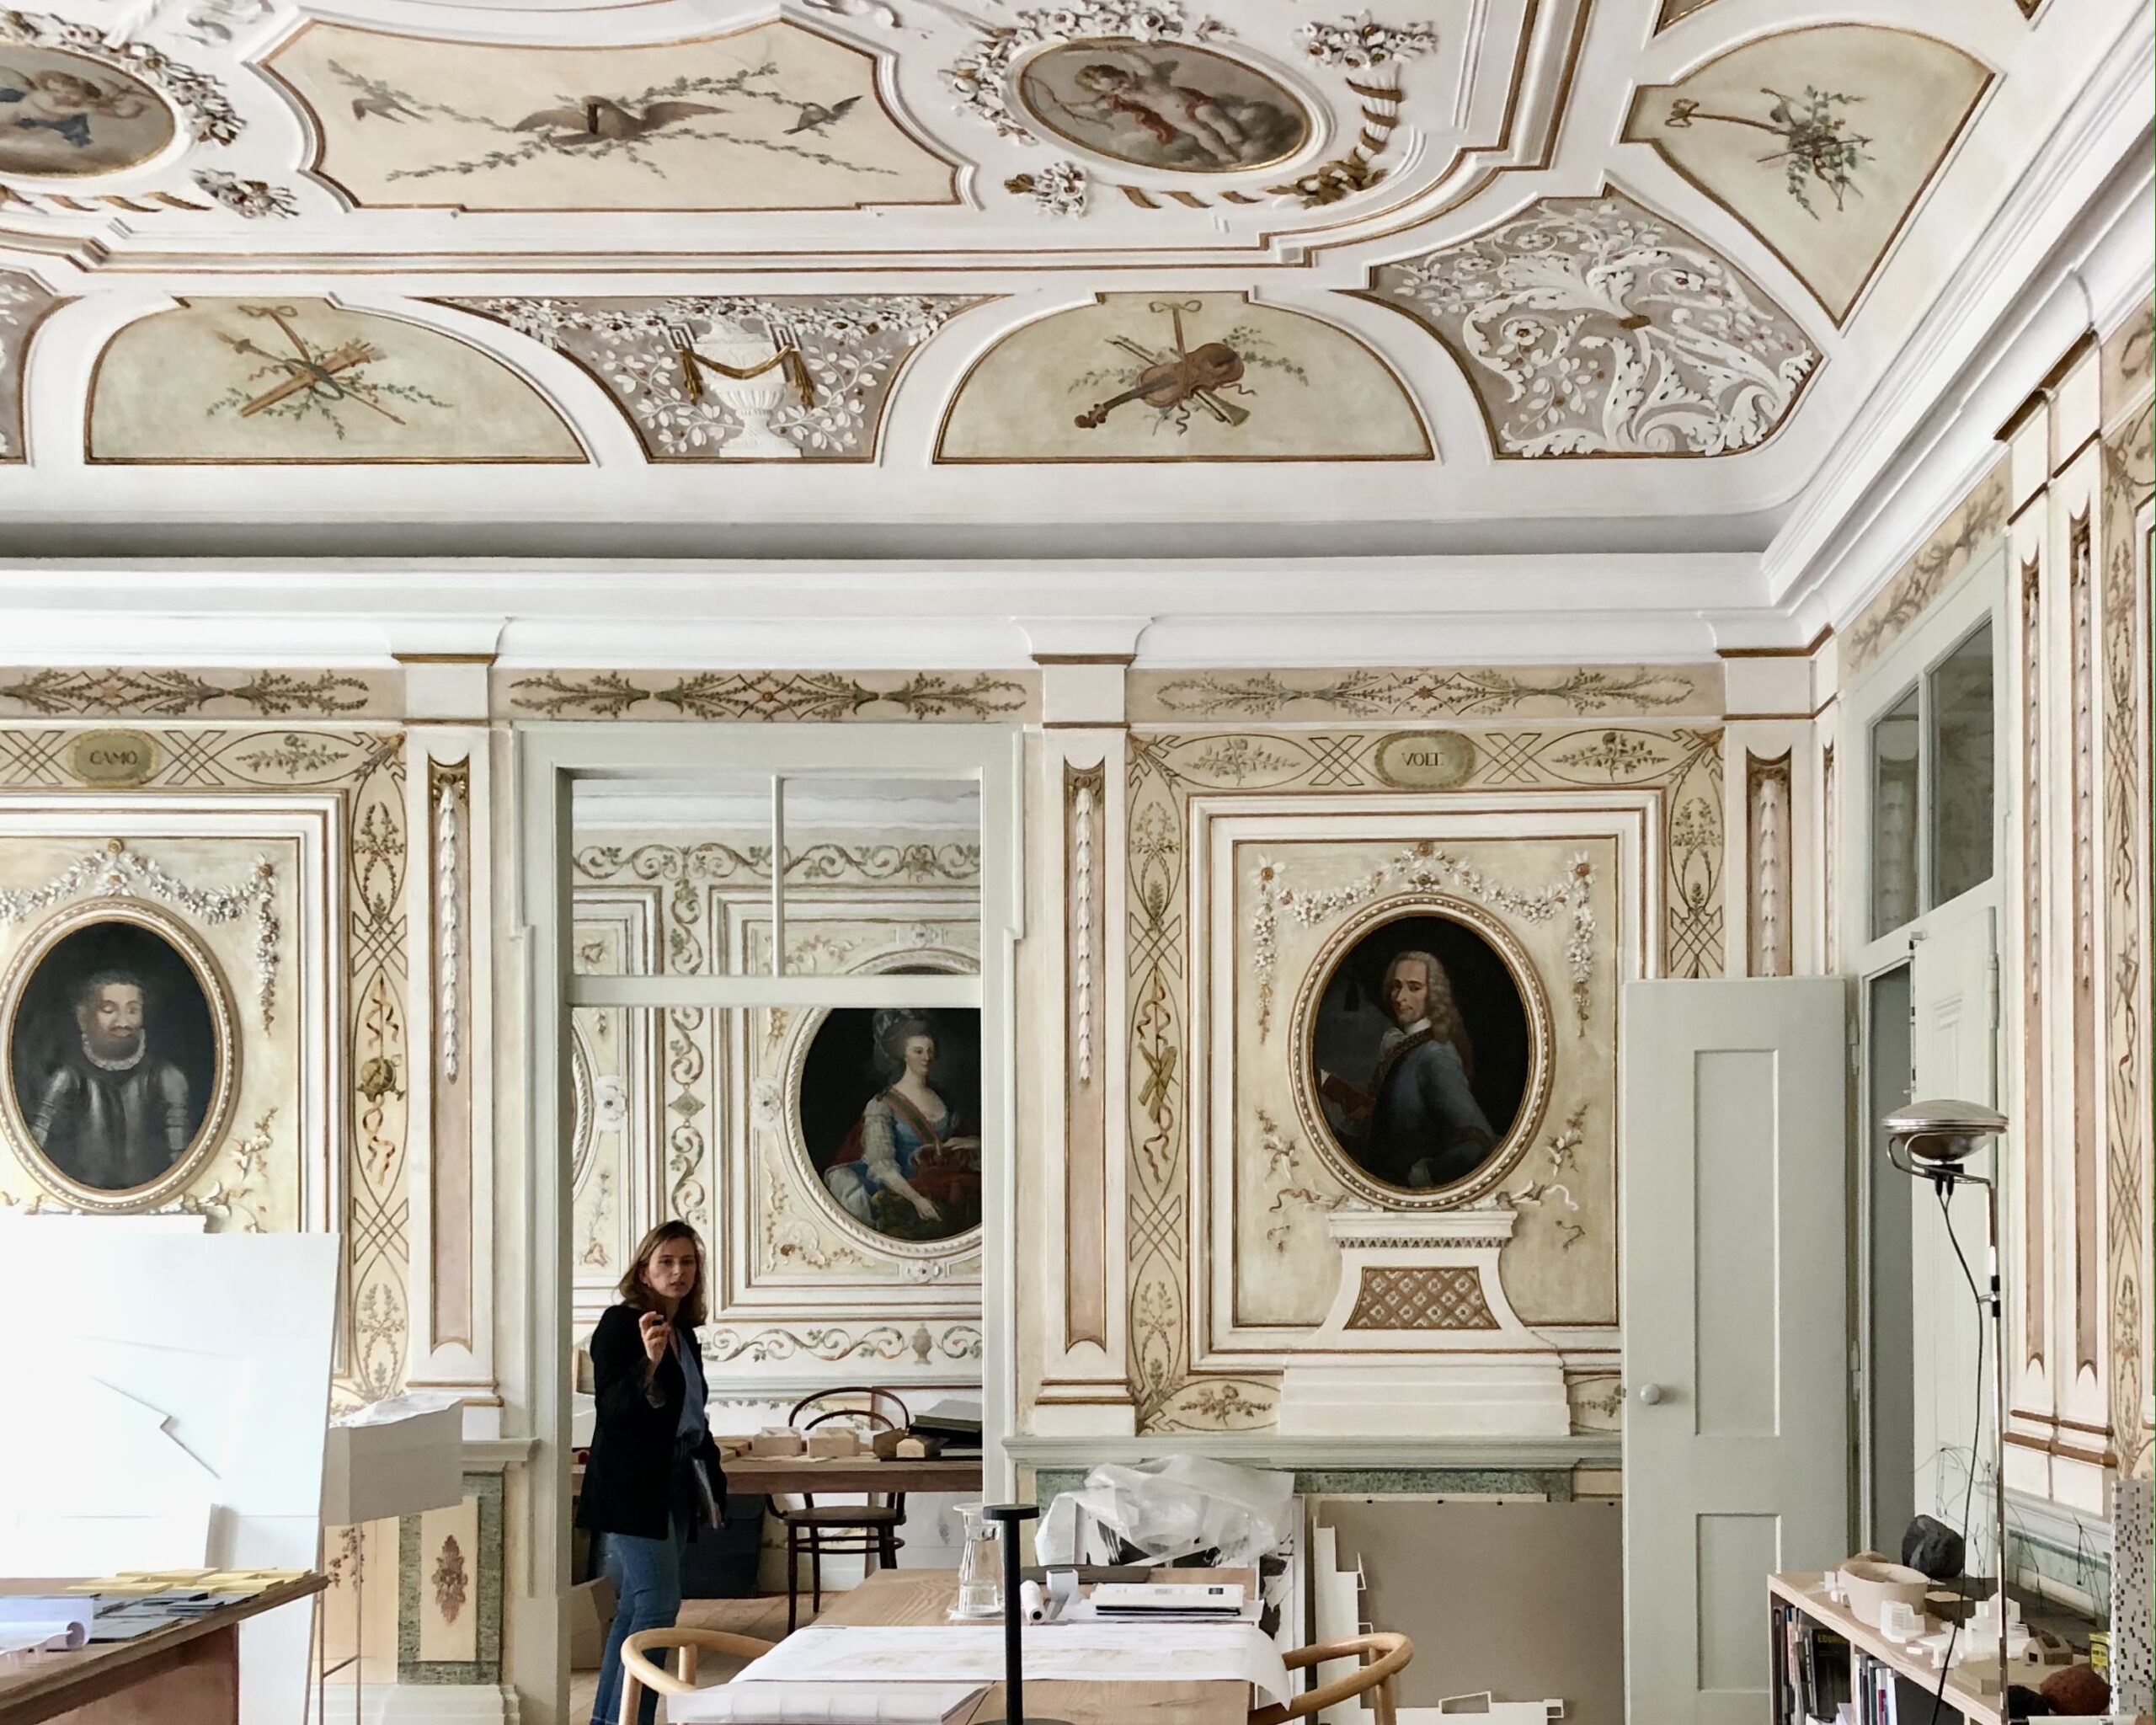 Aires Mateus's office is inside a historic apartment building which still has frescos of royals on the walls.